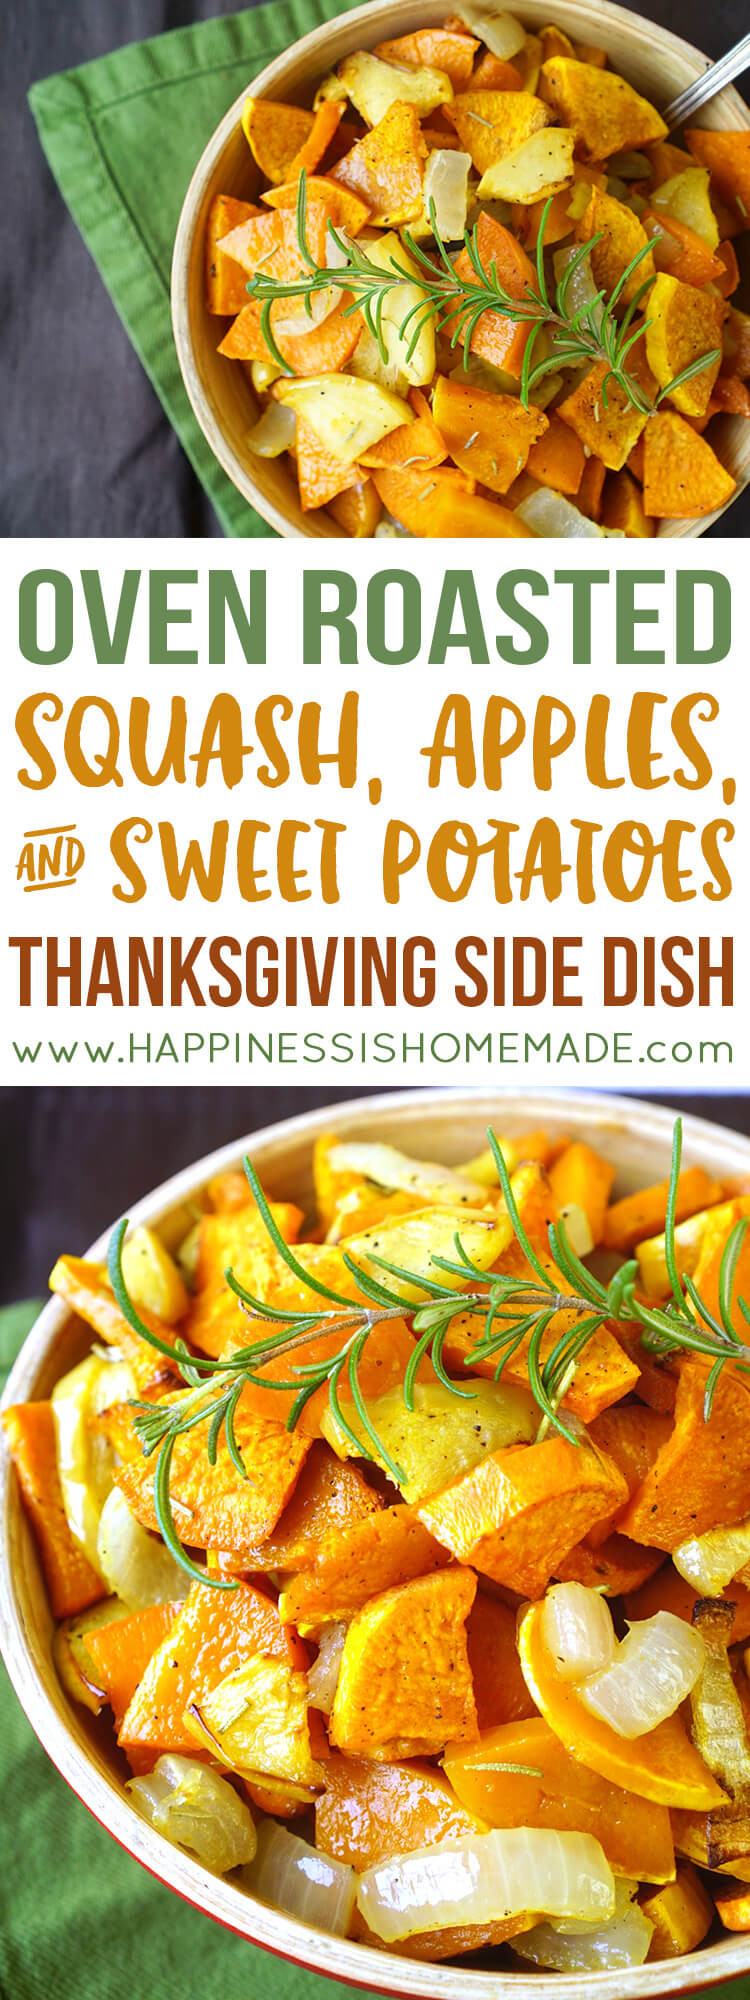 Sweet Potatoes For Thanksgiving
 Roasted Sweet Potatoes Squash & Apples Happiness is